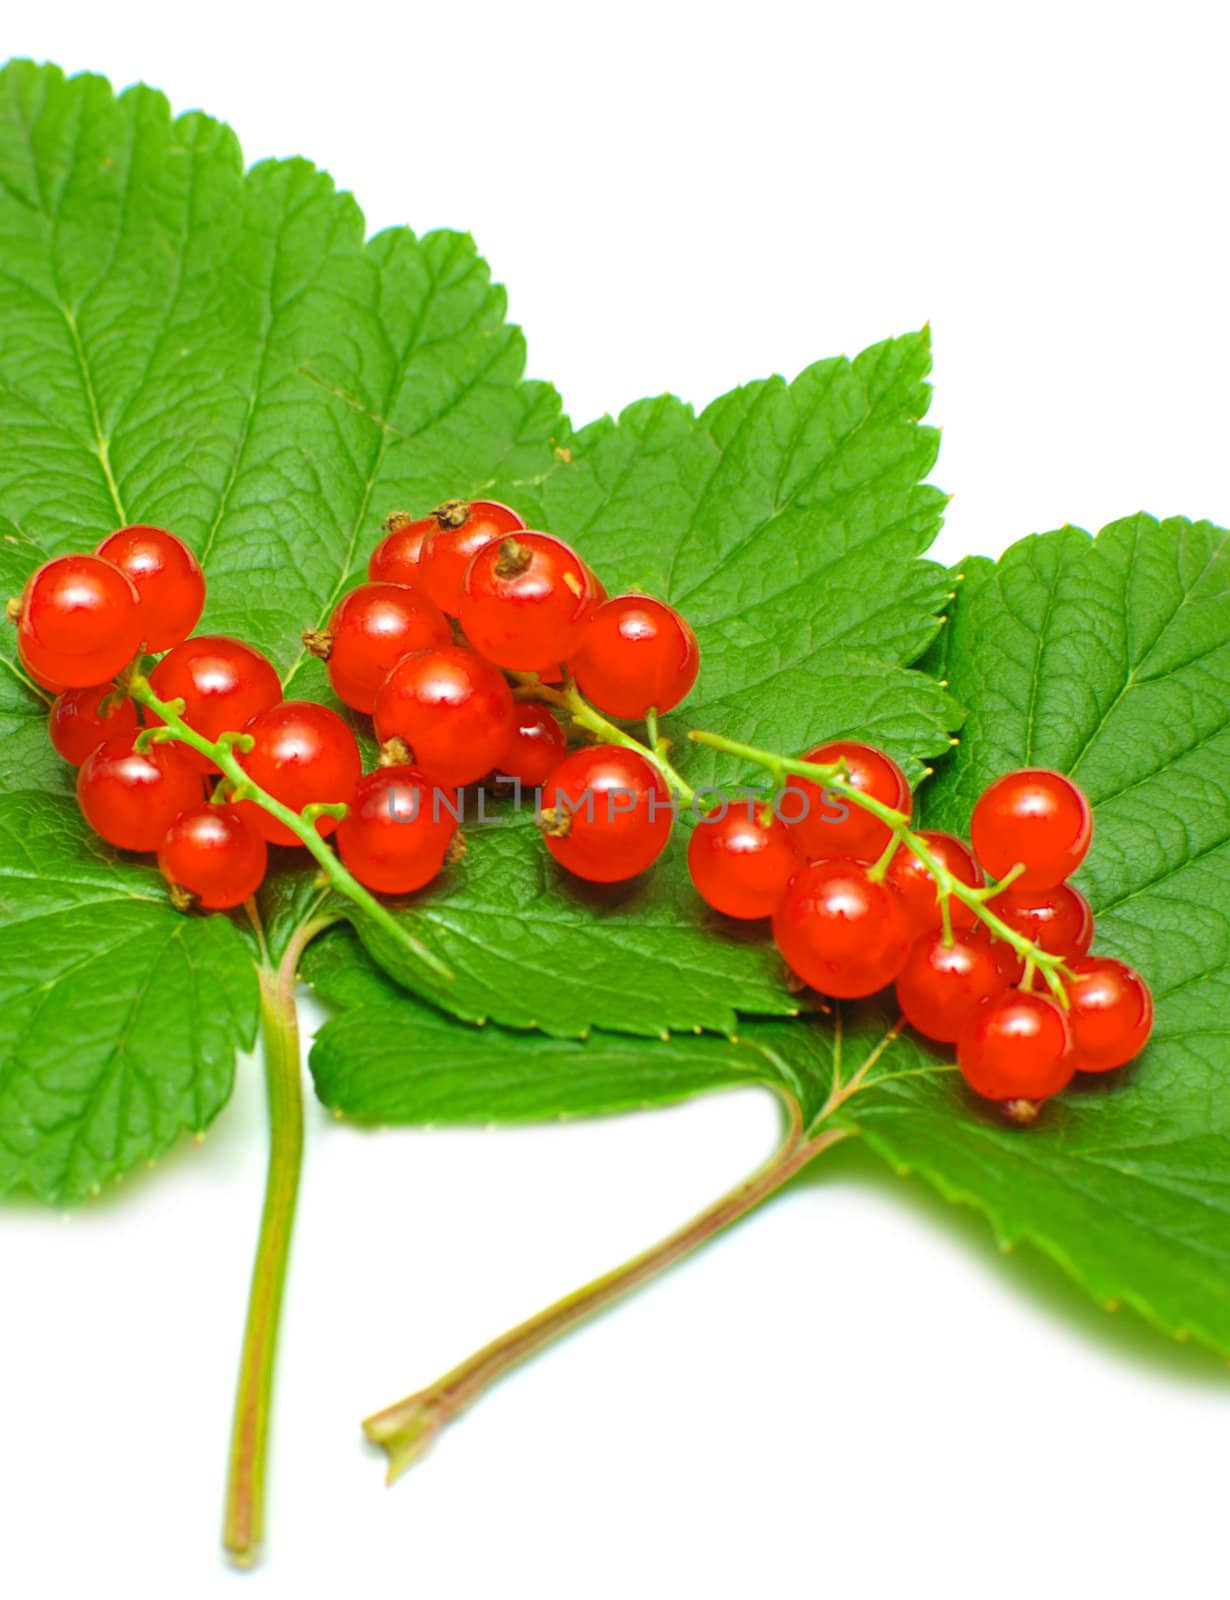 red currant with green leaves on white background